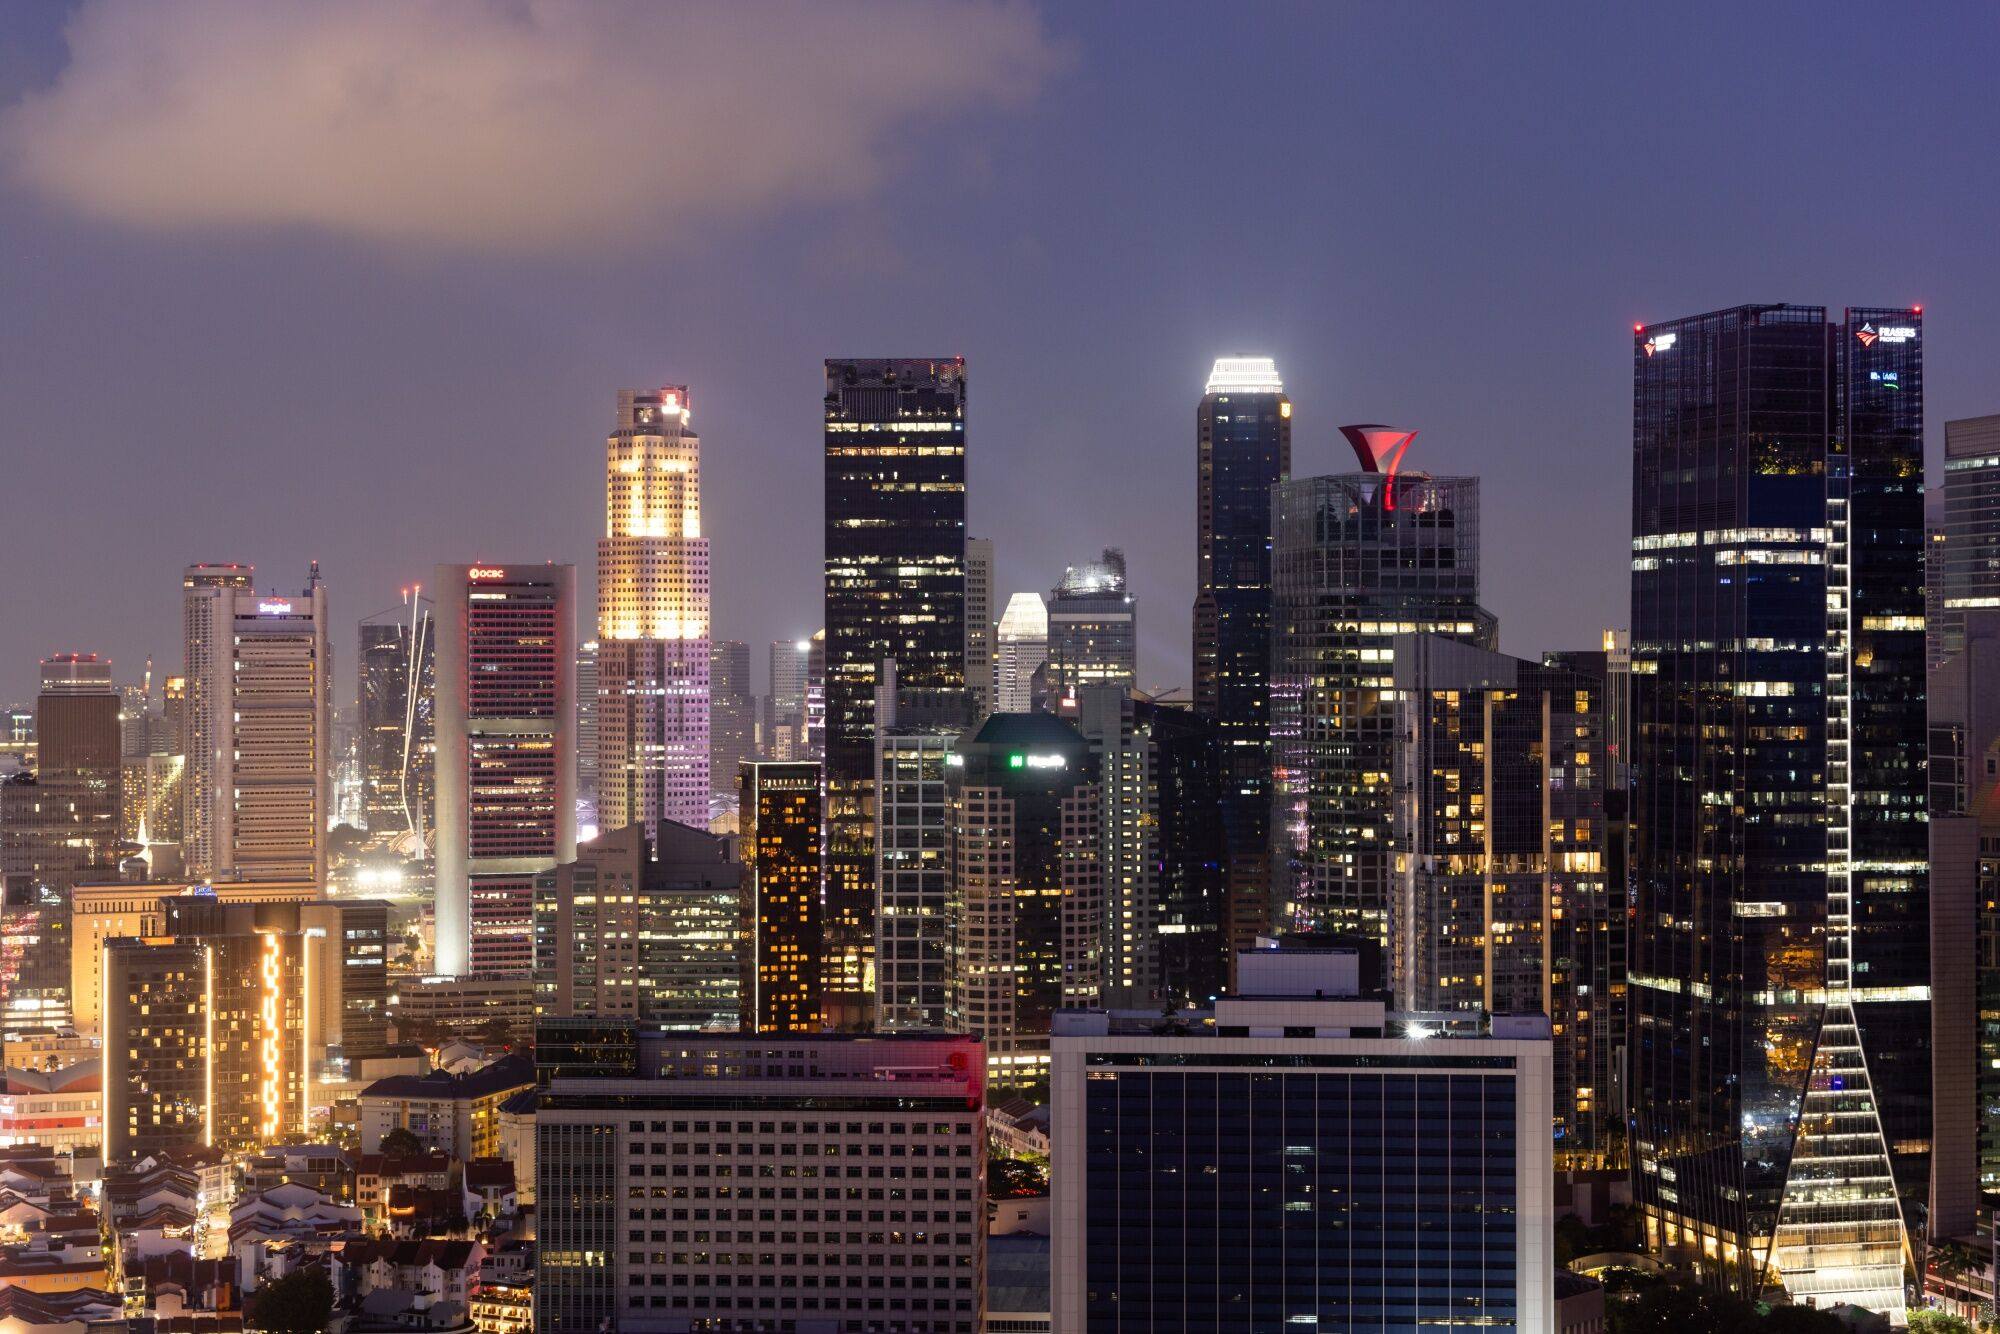 Singapore’s skyline. A domestic worker was sentenced to three weeks’ jail for hitting her employer’s son. Photo: Bloomberg